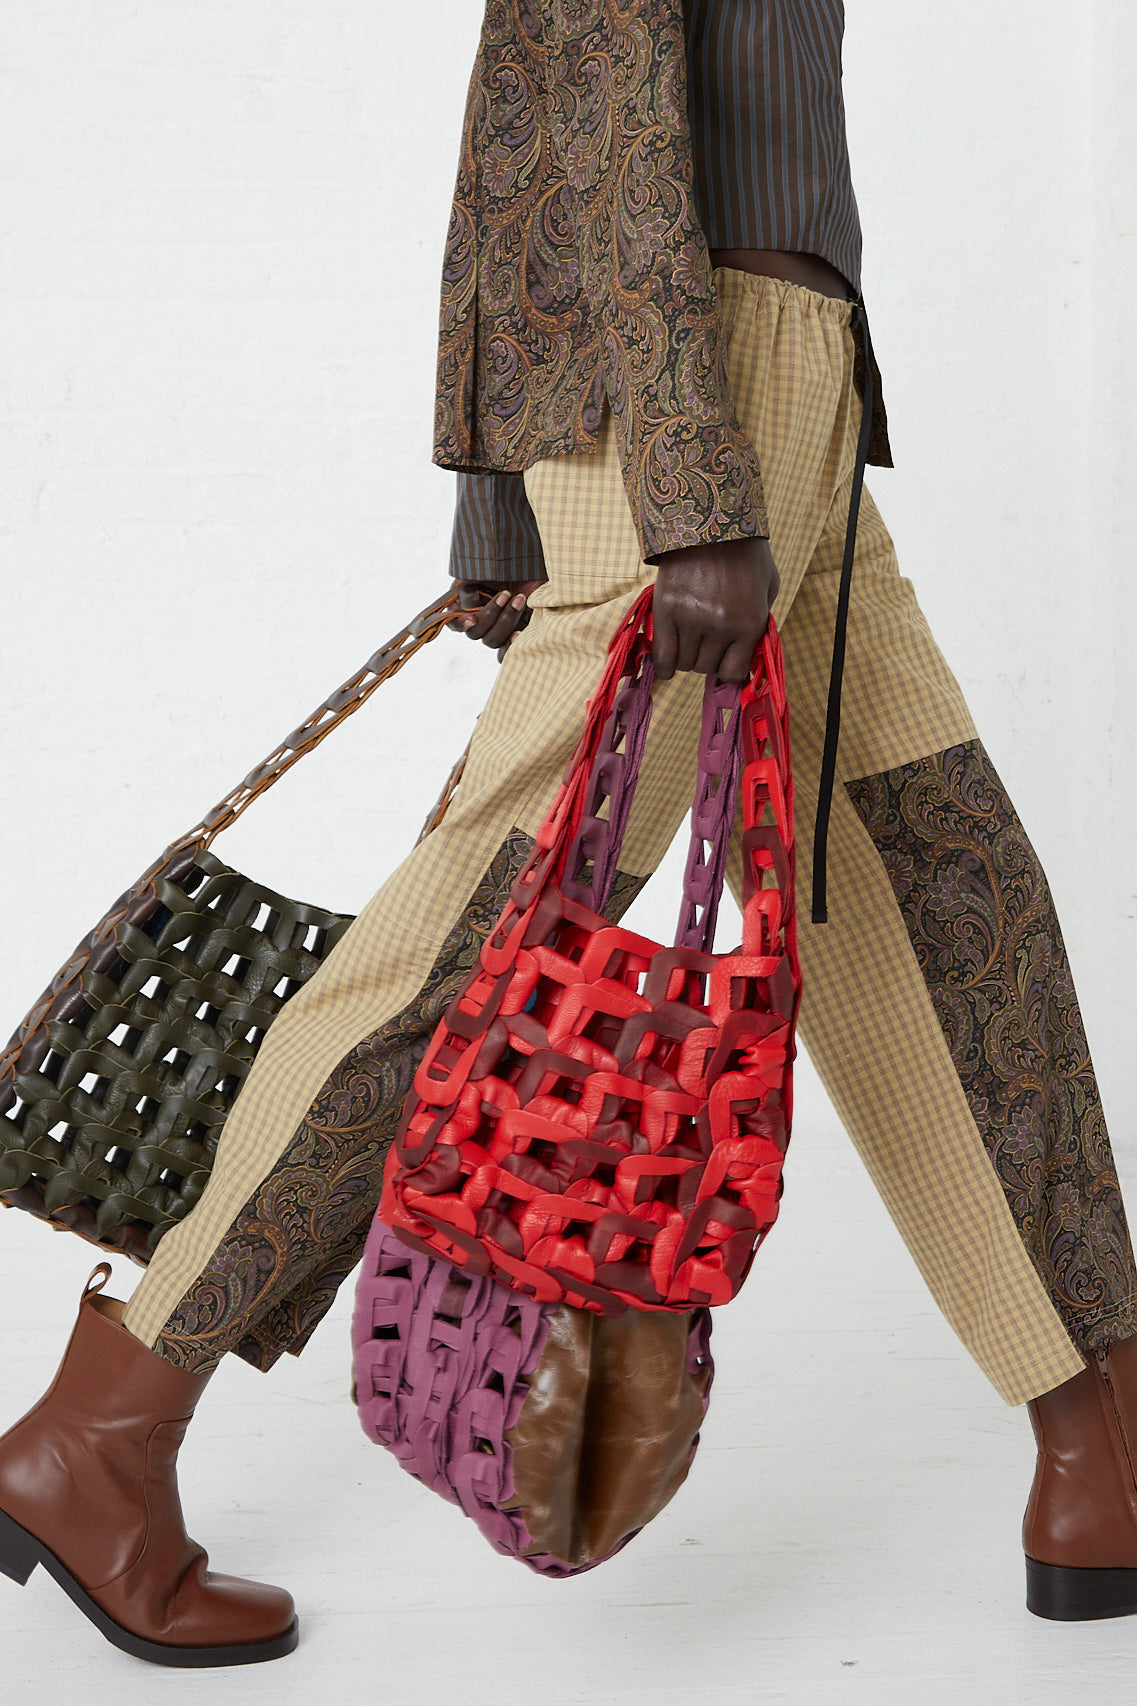 A woman is carrying a SC103 assortment of bags with woven patterns.